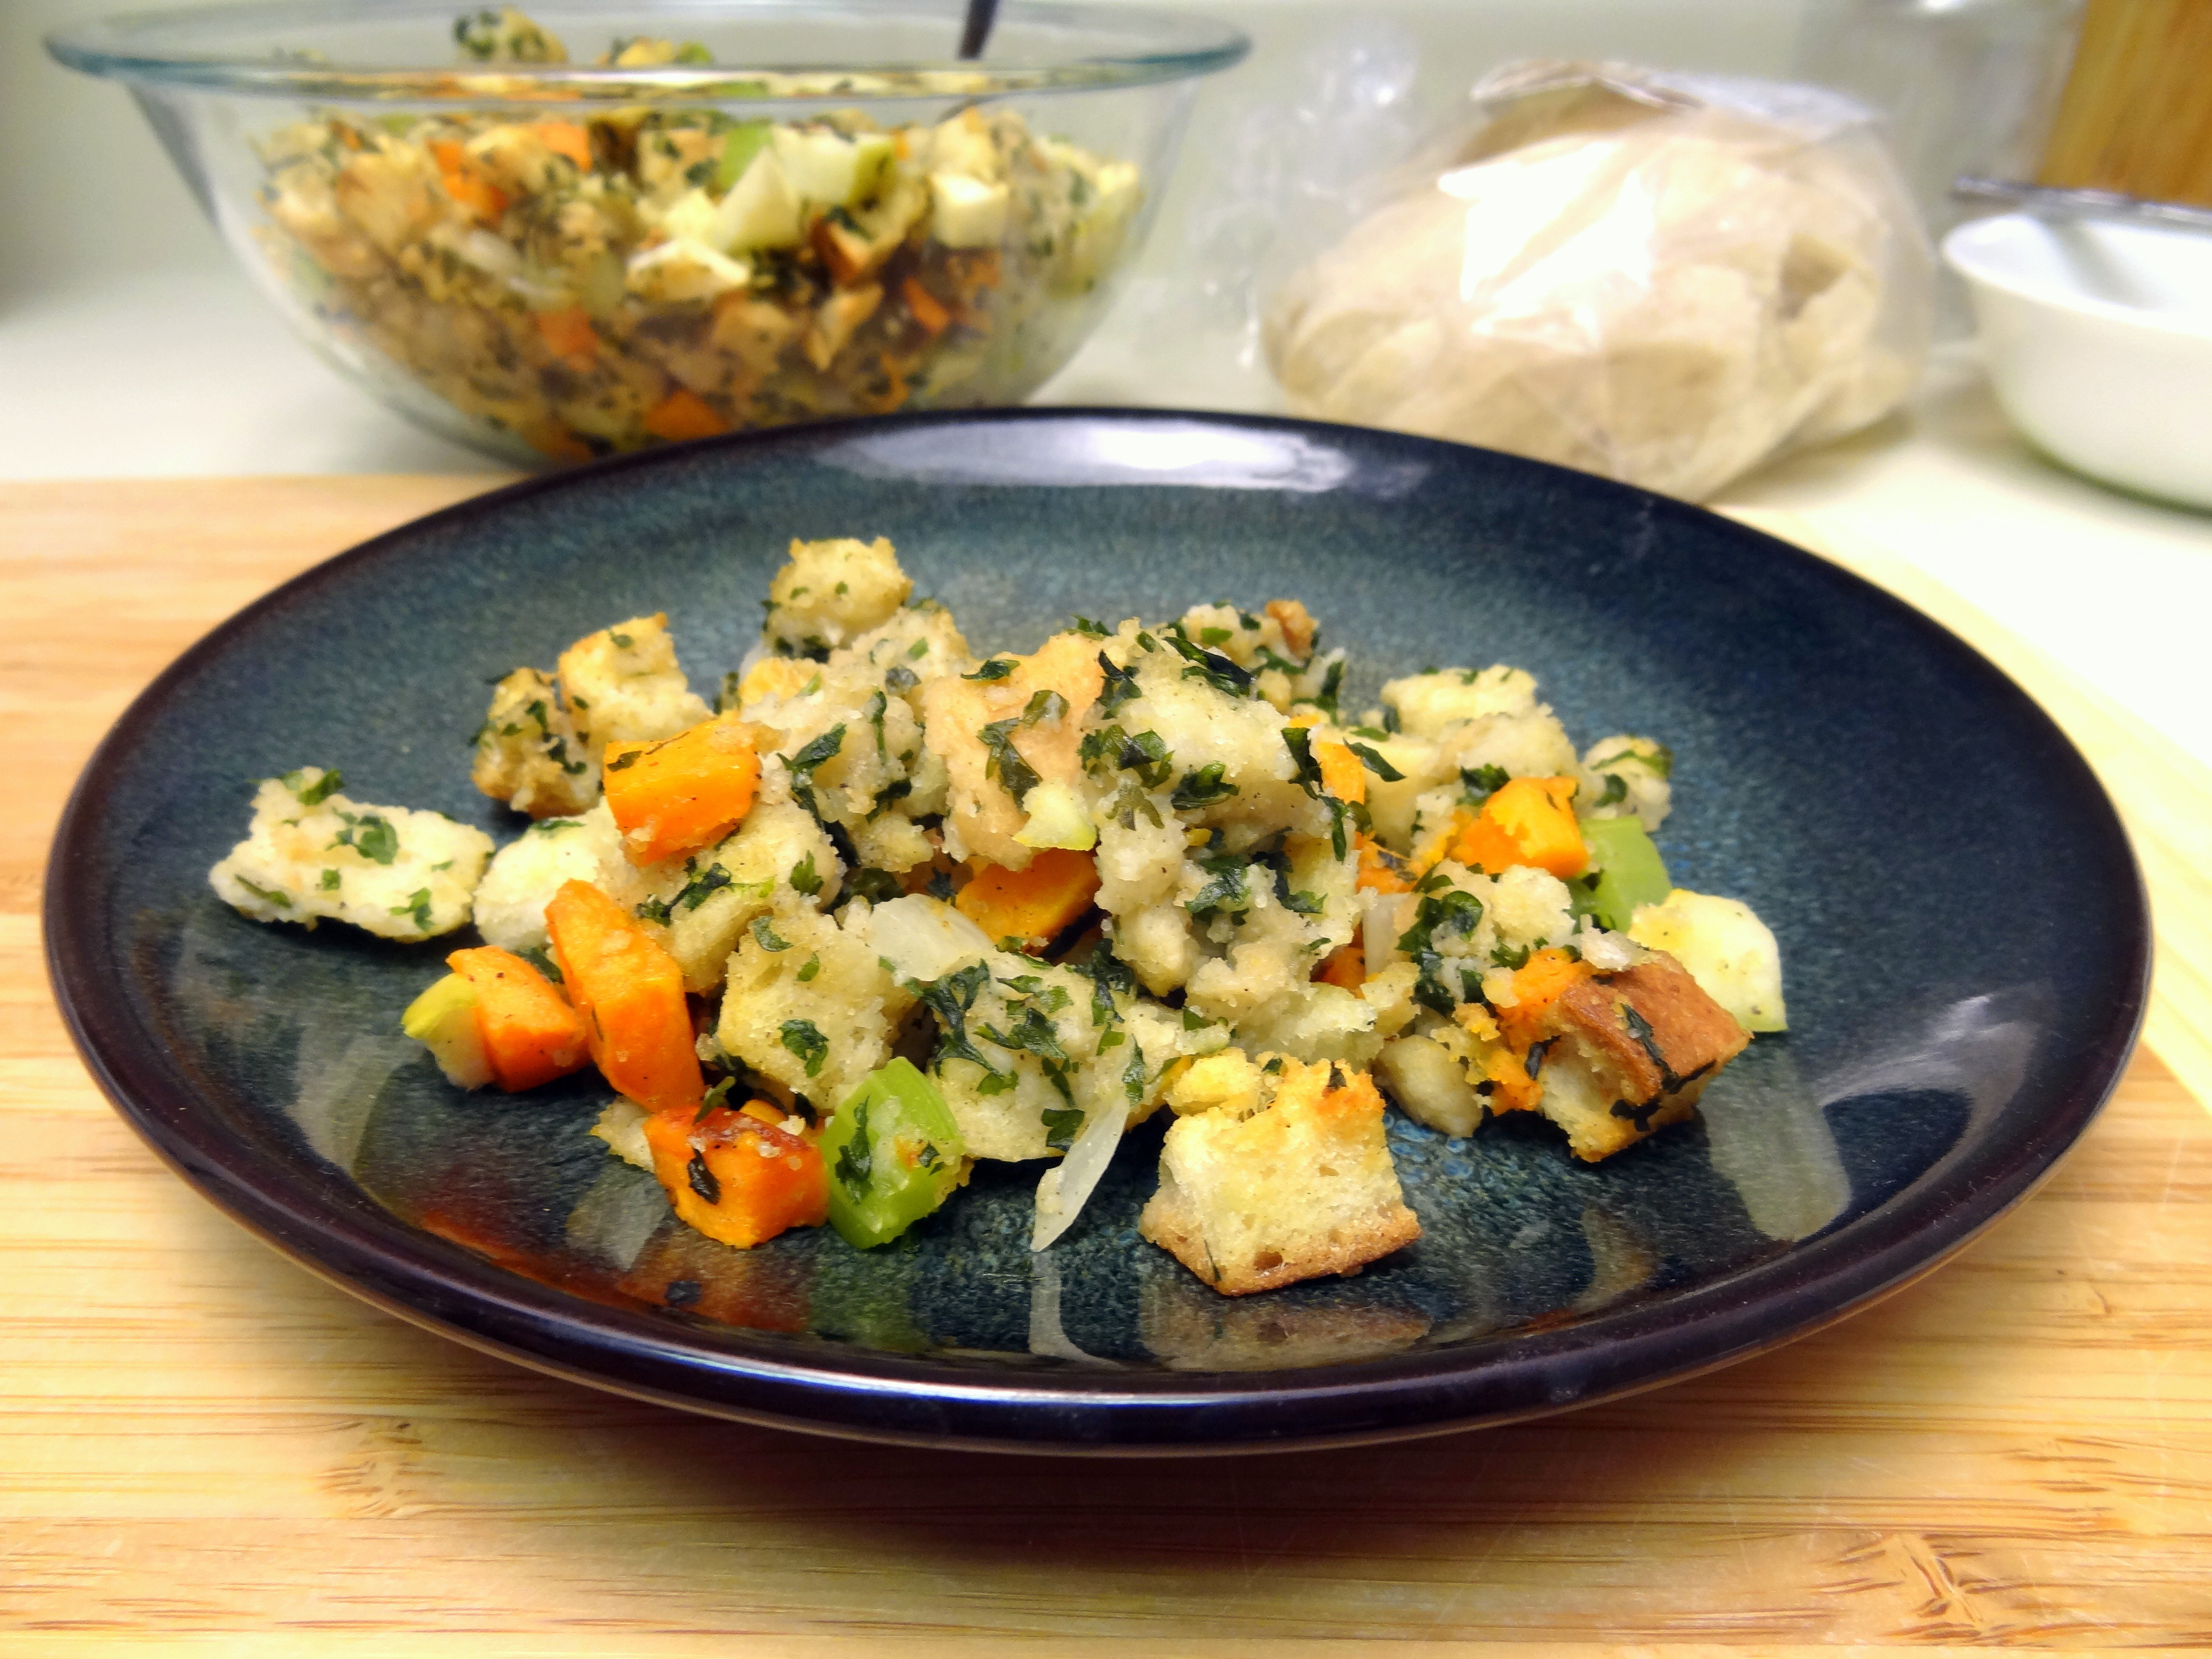 stuffing salad with roasted sweet potatoes and tart apples